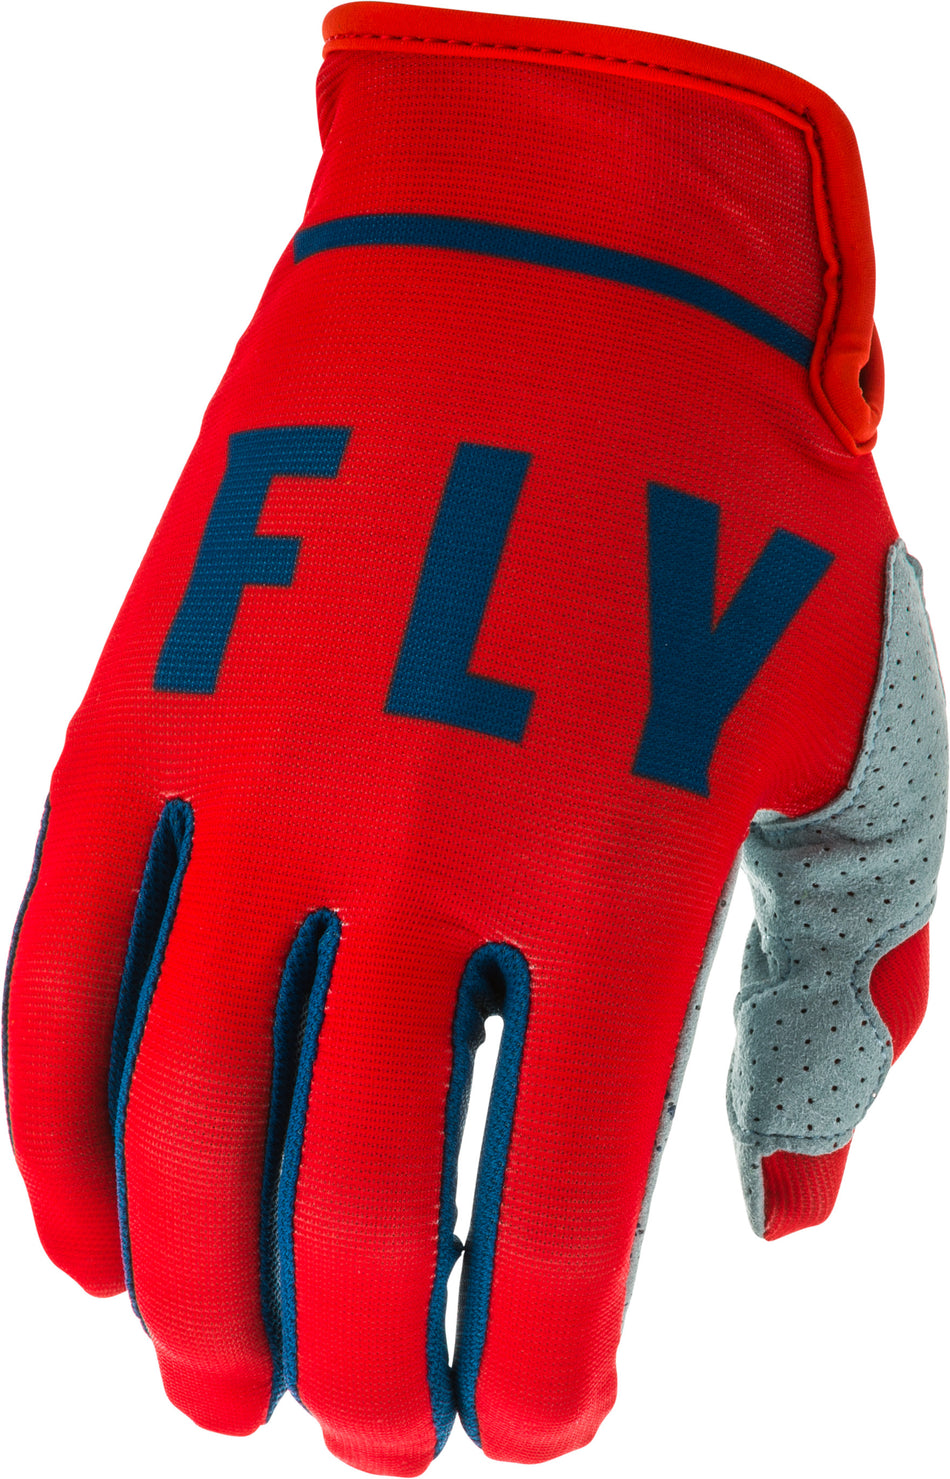 FLY RACING Lite Gloves Red/Slate/Navy Sz 07 373-71207